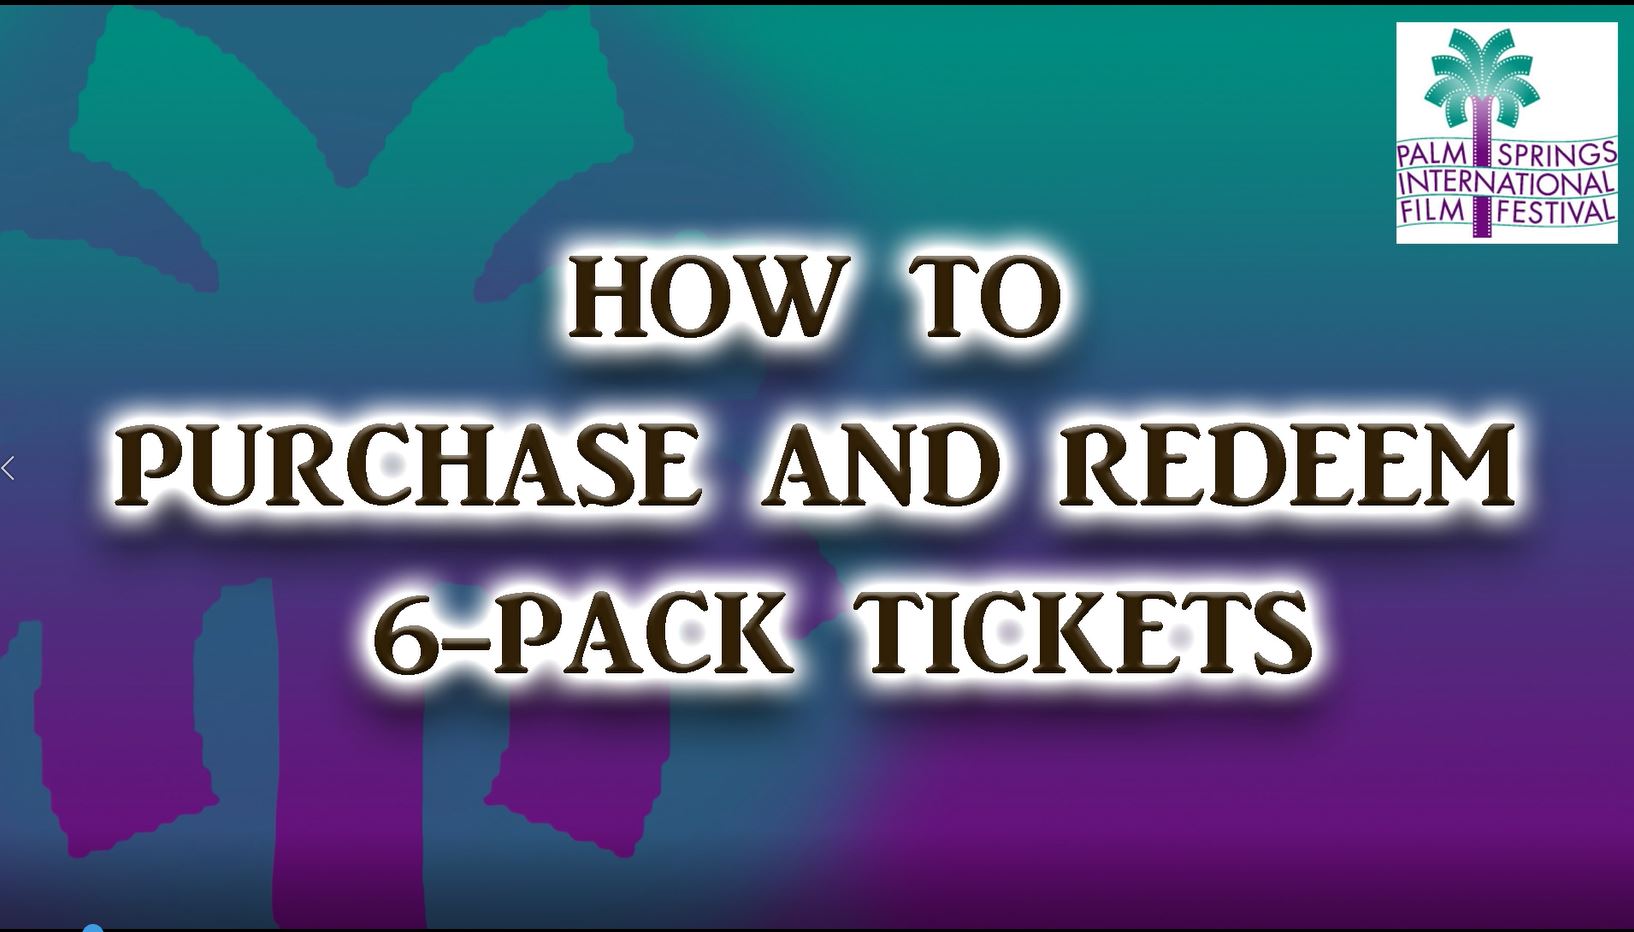 How to Purchase and Redeem 6-pack Tickets